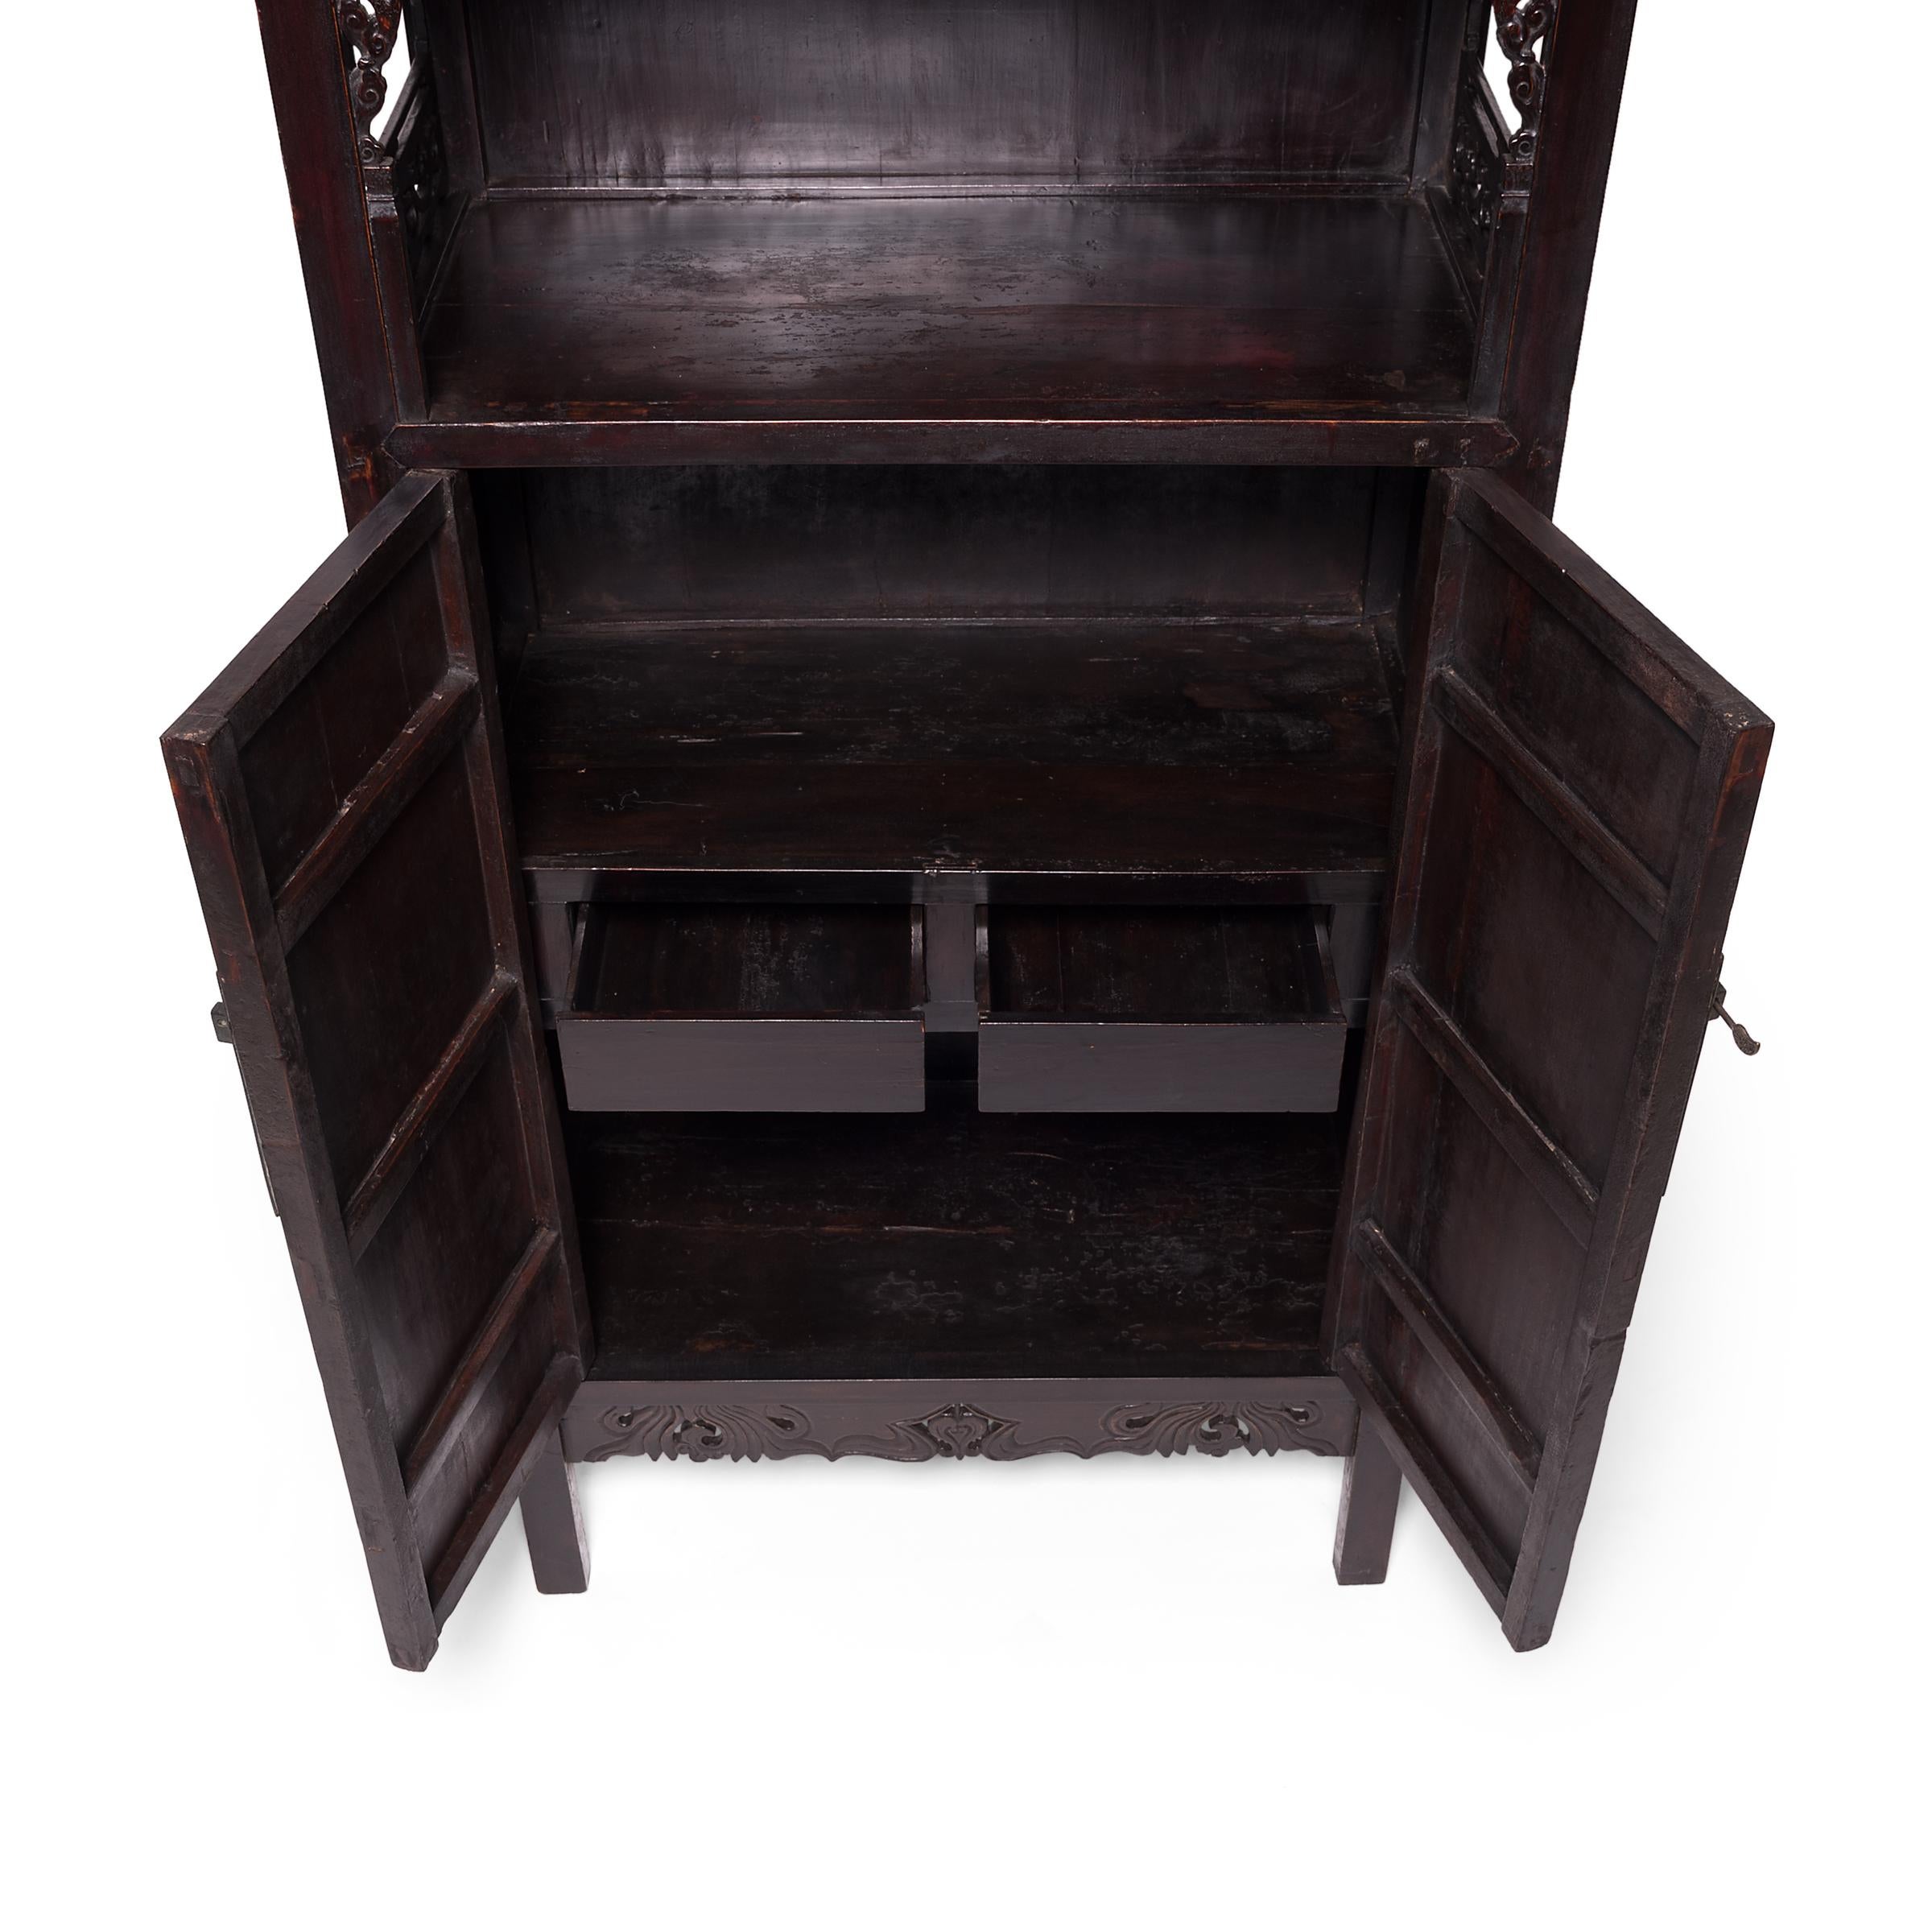 Chinese Triple Bat Book Cabinet, c. 1850 In Good Condition For Sale In Chicago, IL